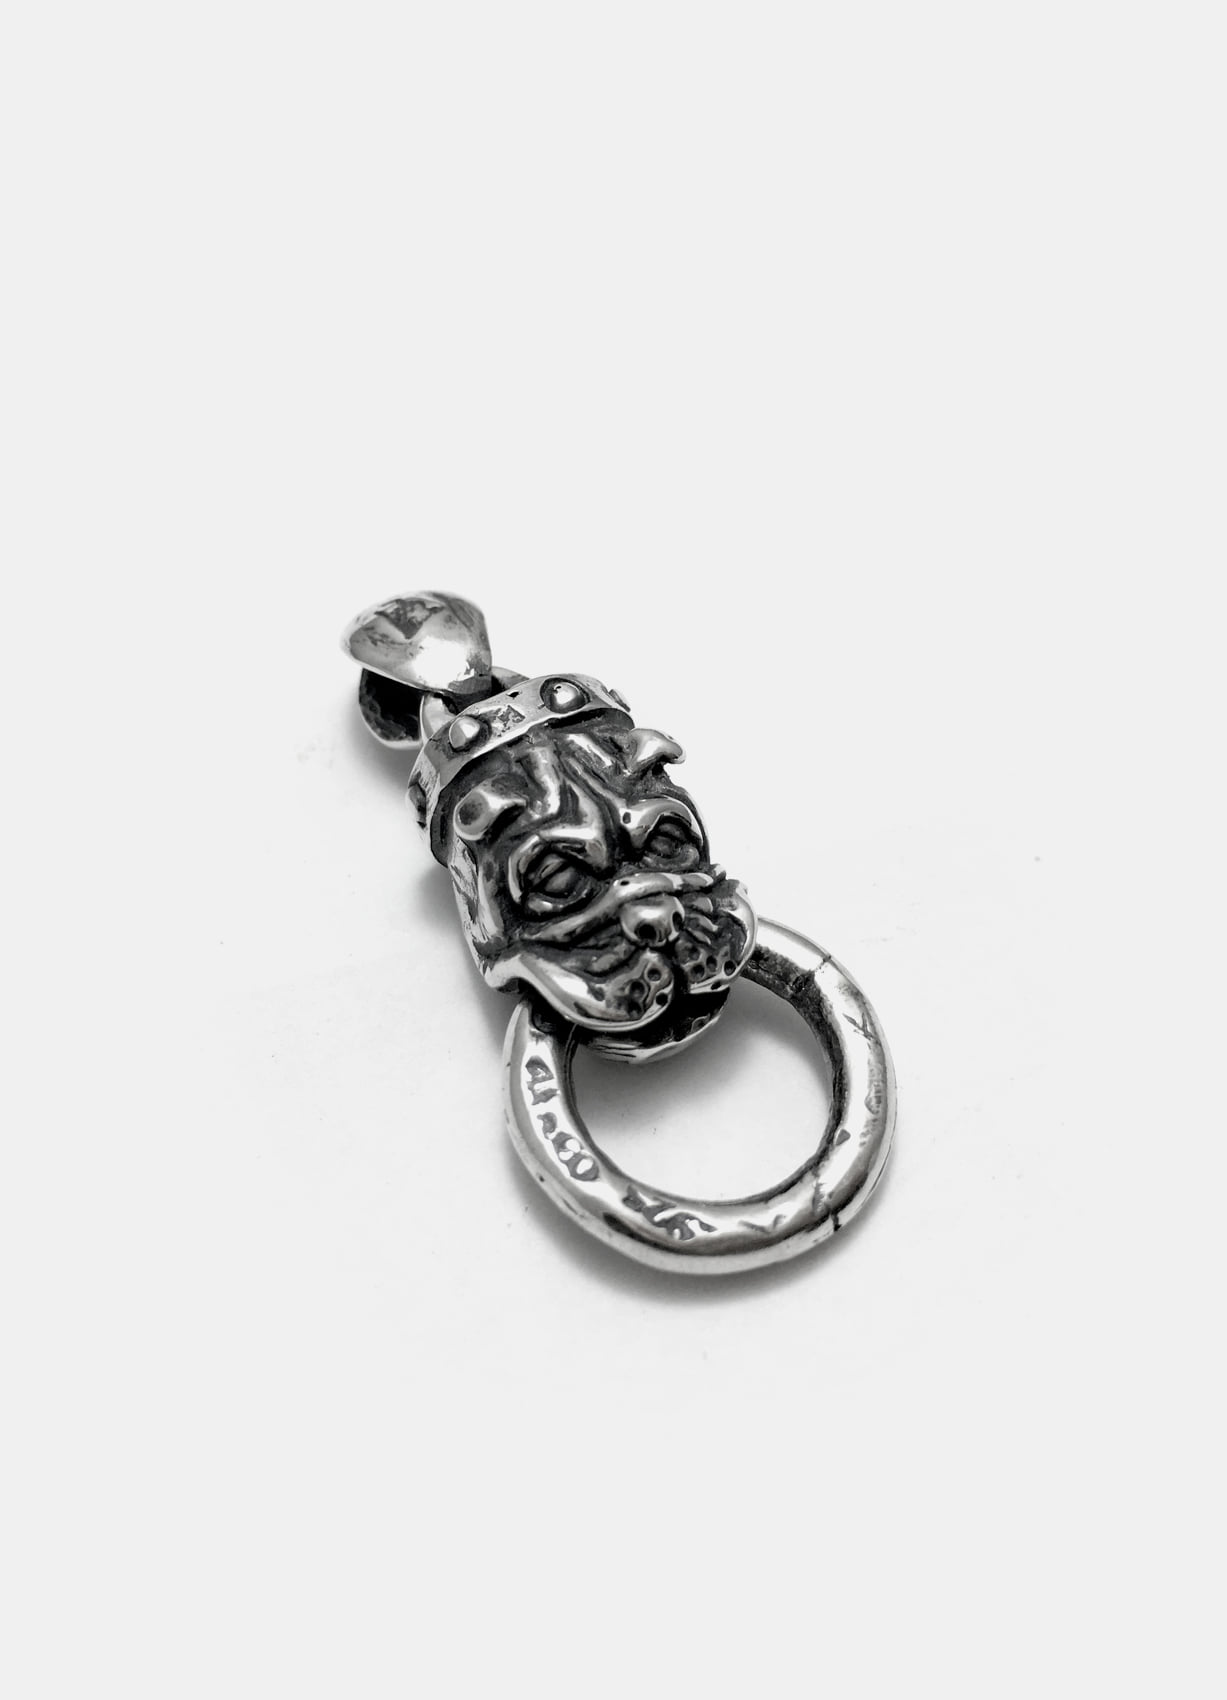 Bulldog Silver Pendant with OG Chains